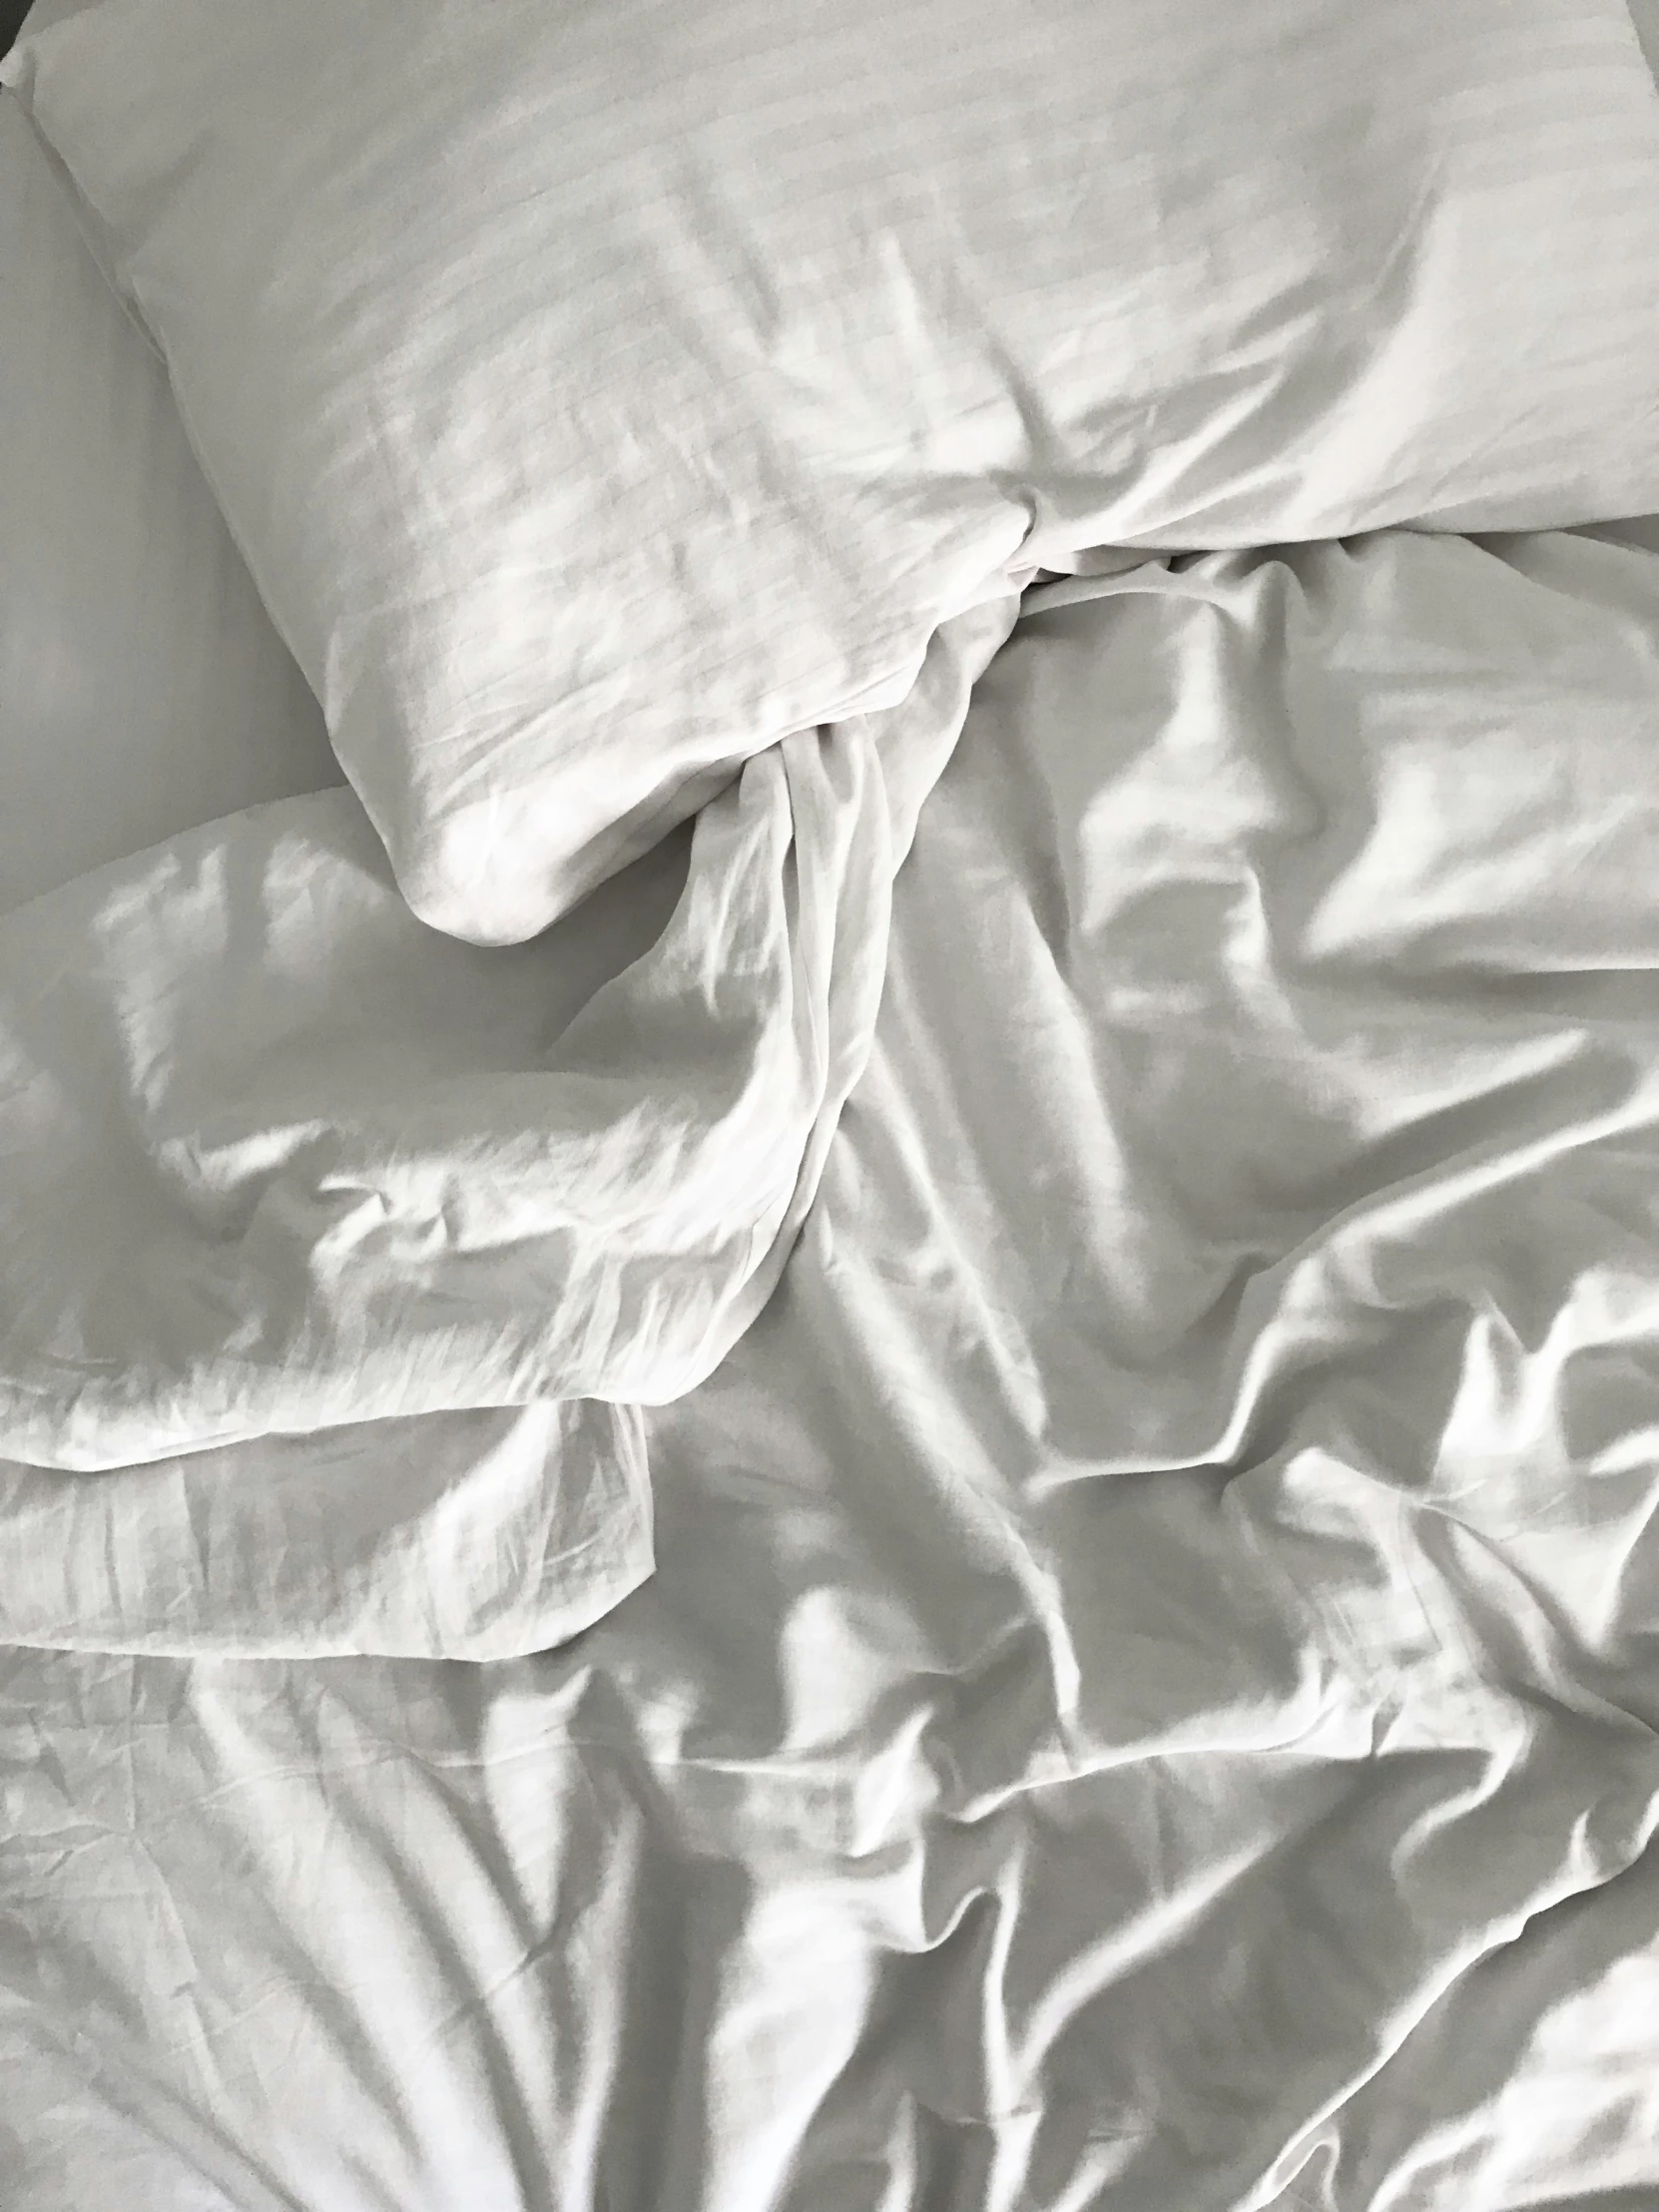 the bed is covered with white sheets and pillows